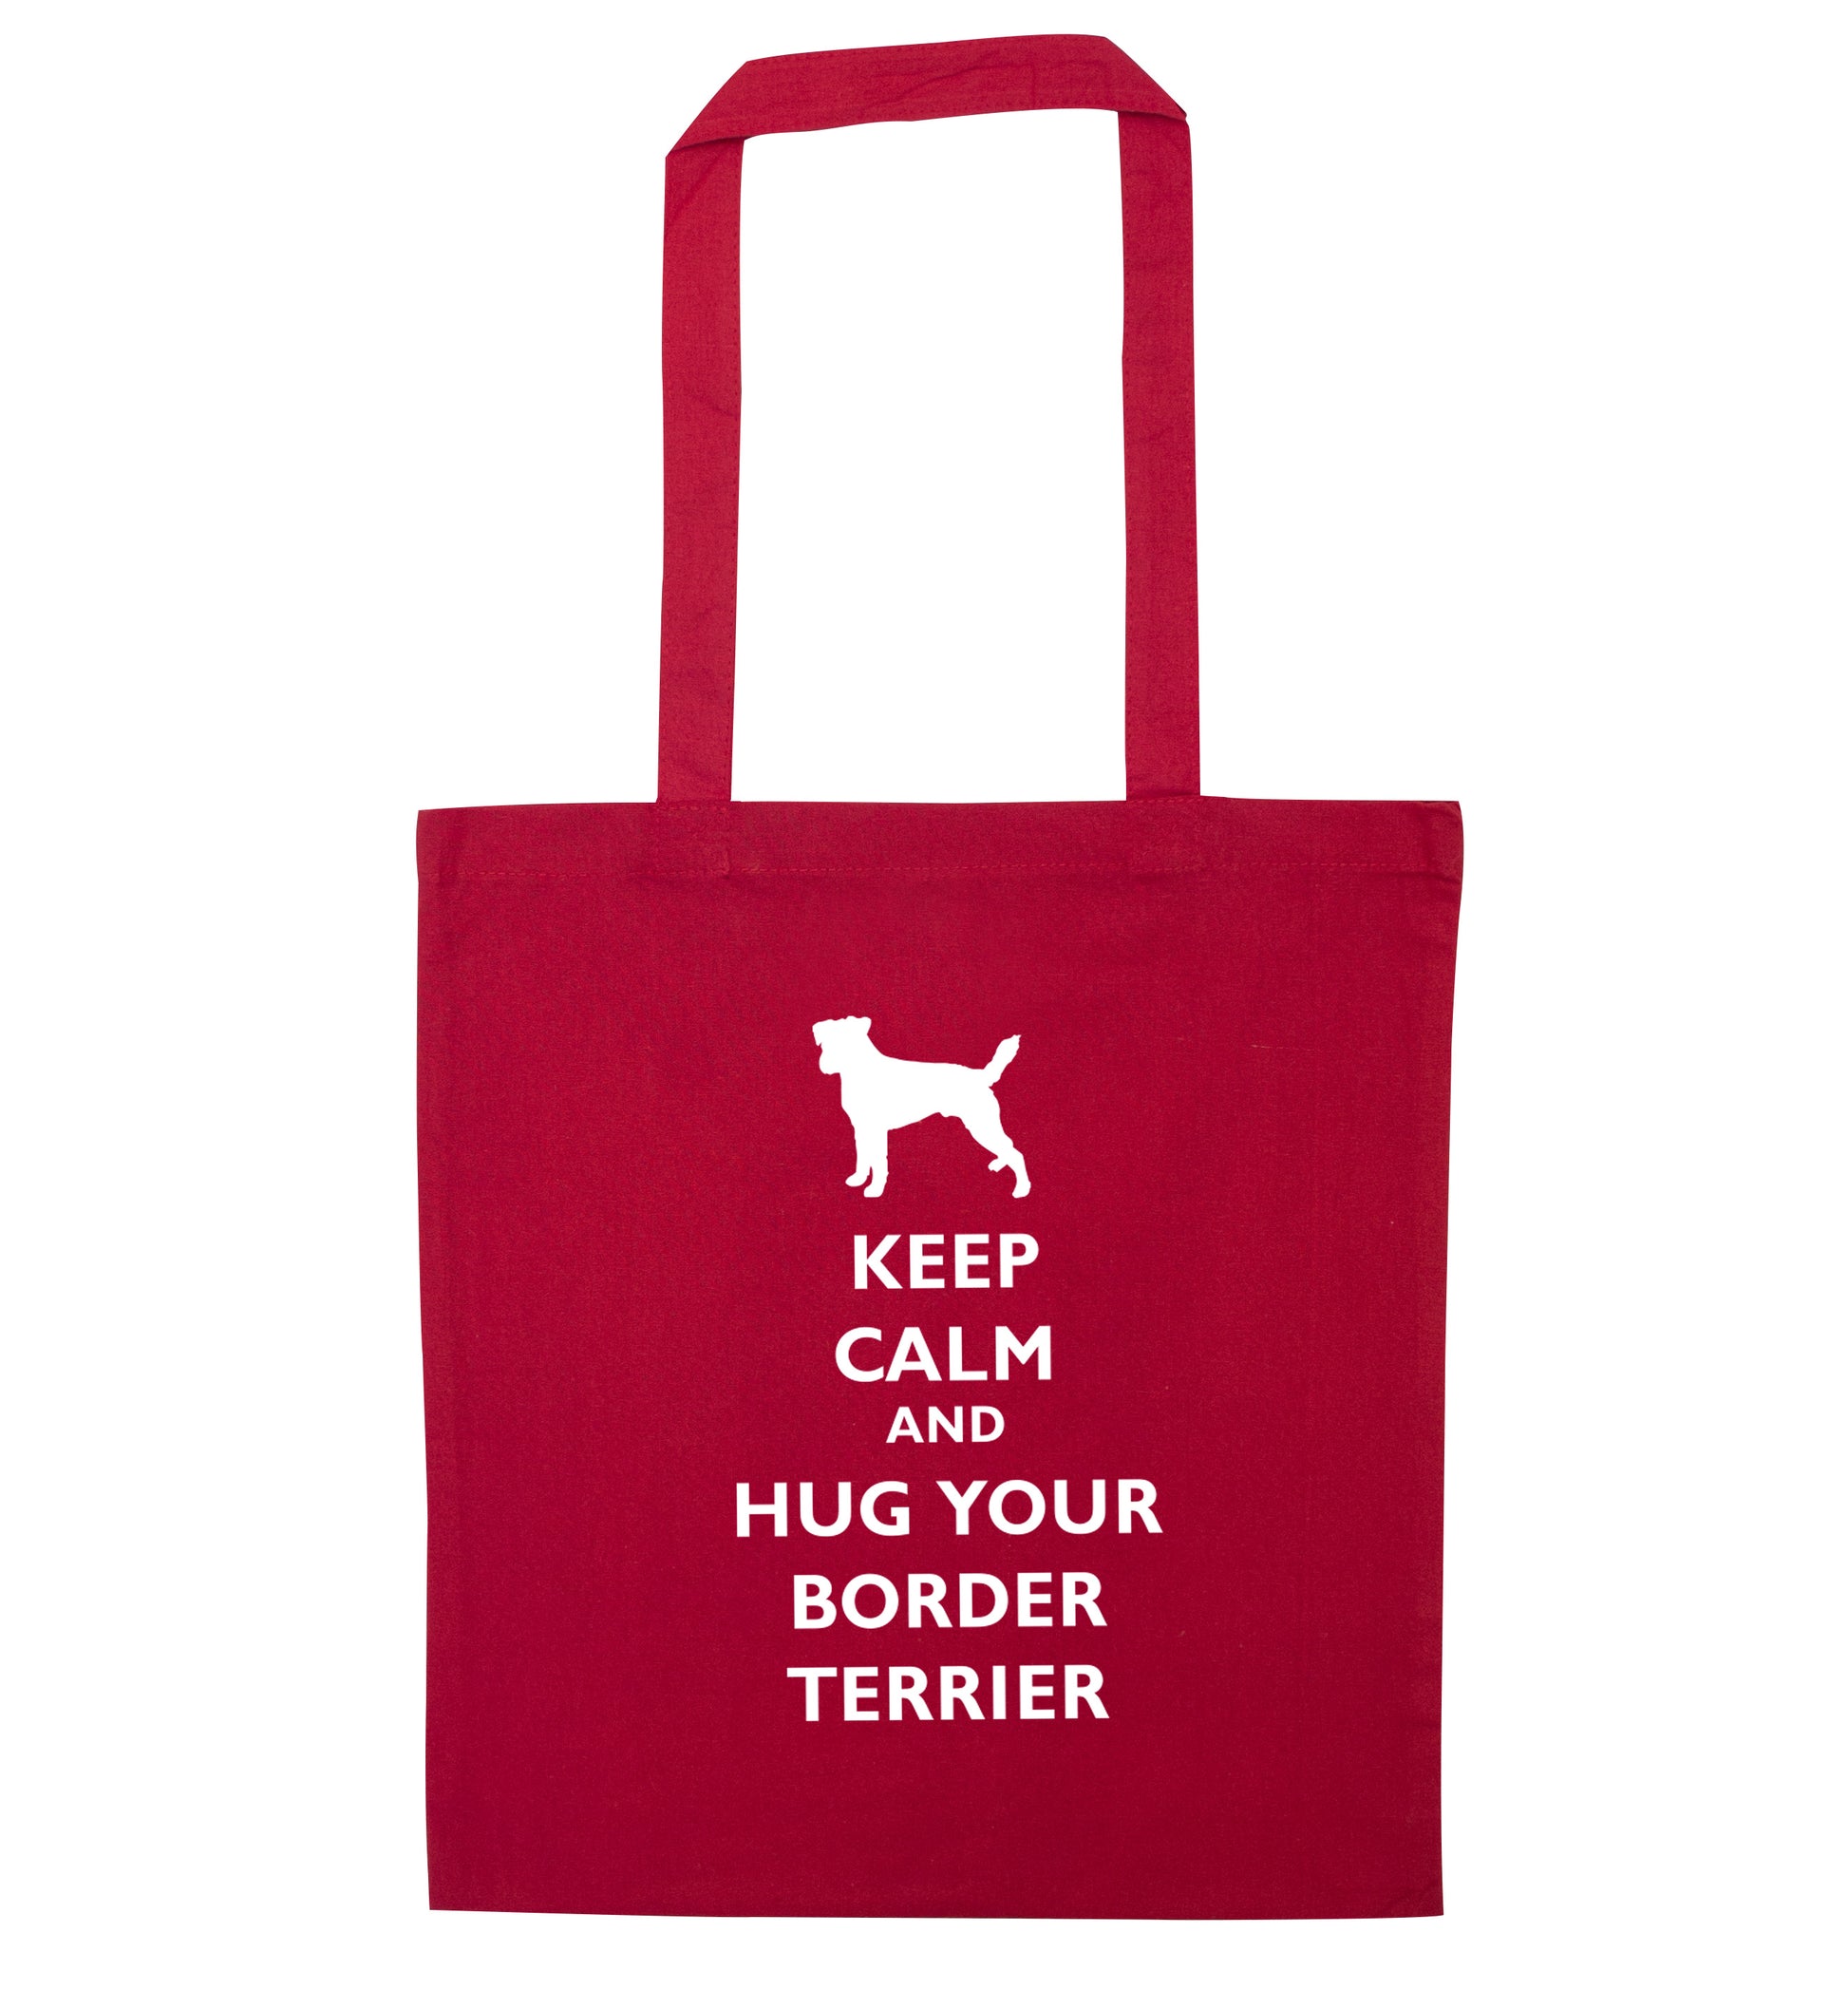 Keep calm and hug your border terrier red tote bag